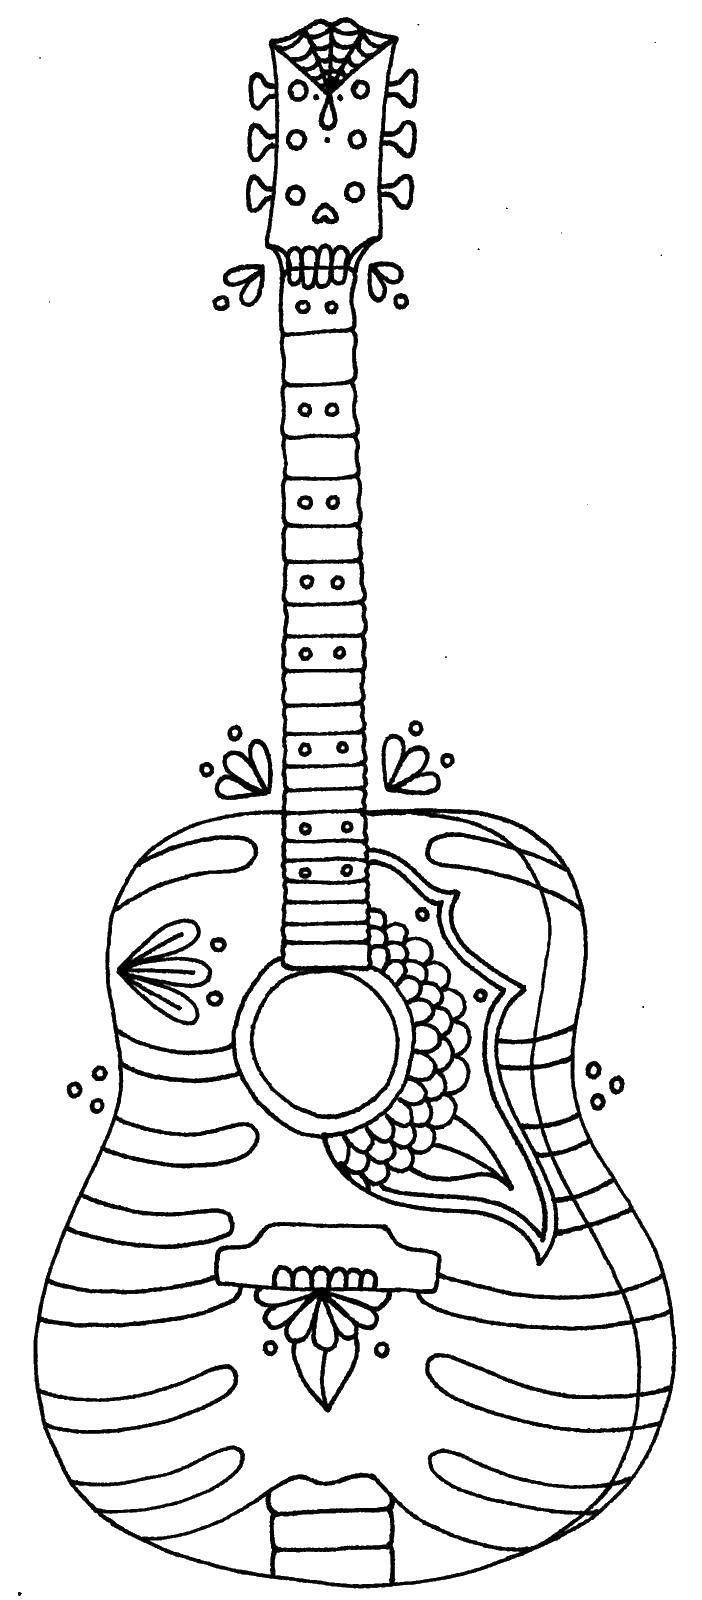 Coloring The guitar is covered with patterns. Category Bathroom with shower. Tags:  Bathroom with shower.